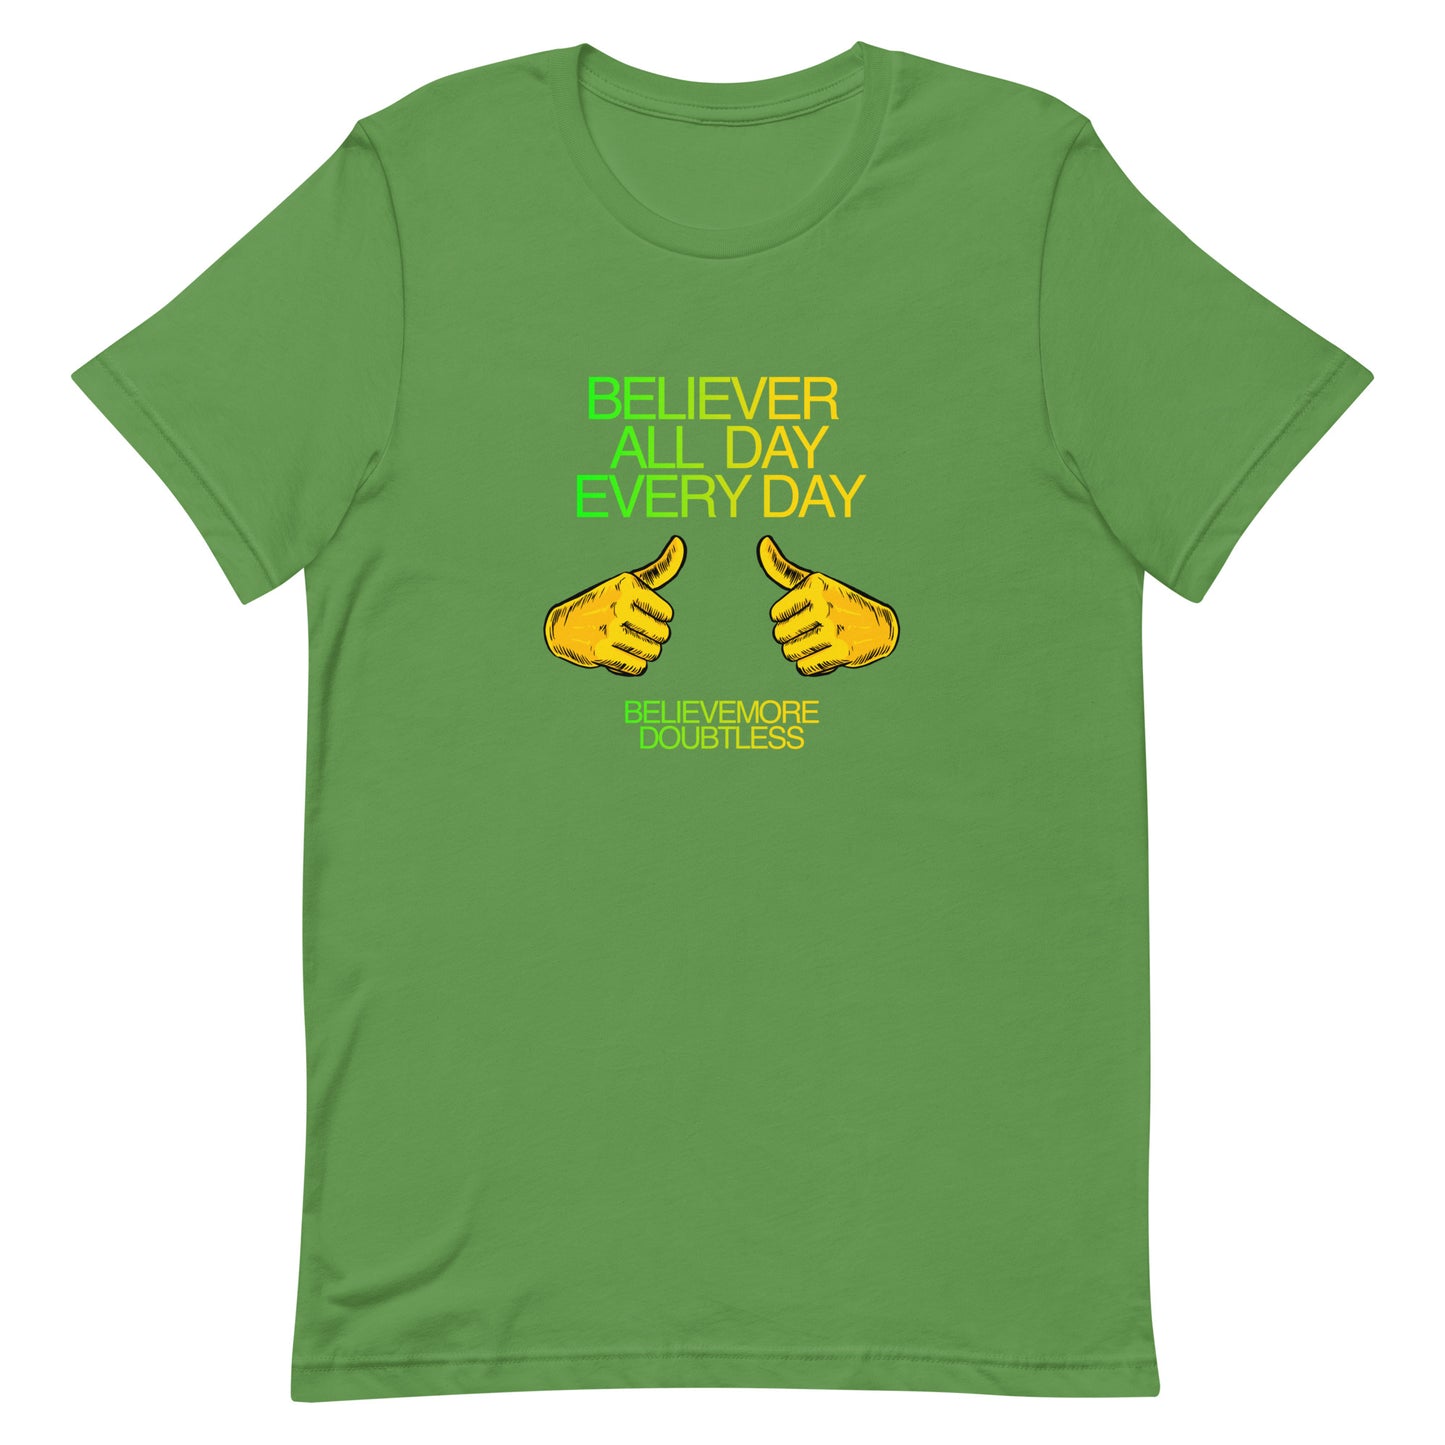 Believer All Day Everyday T-Shirt